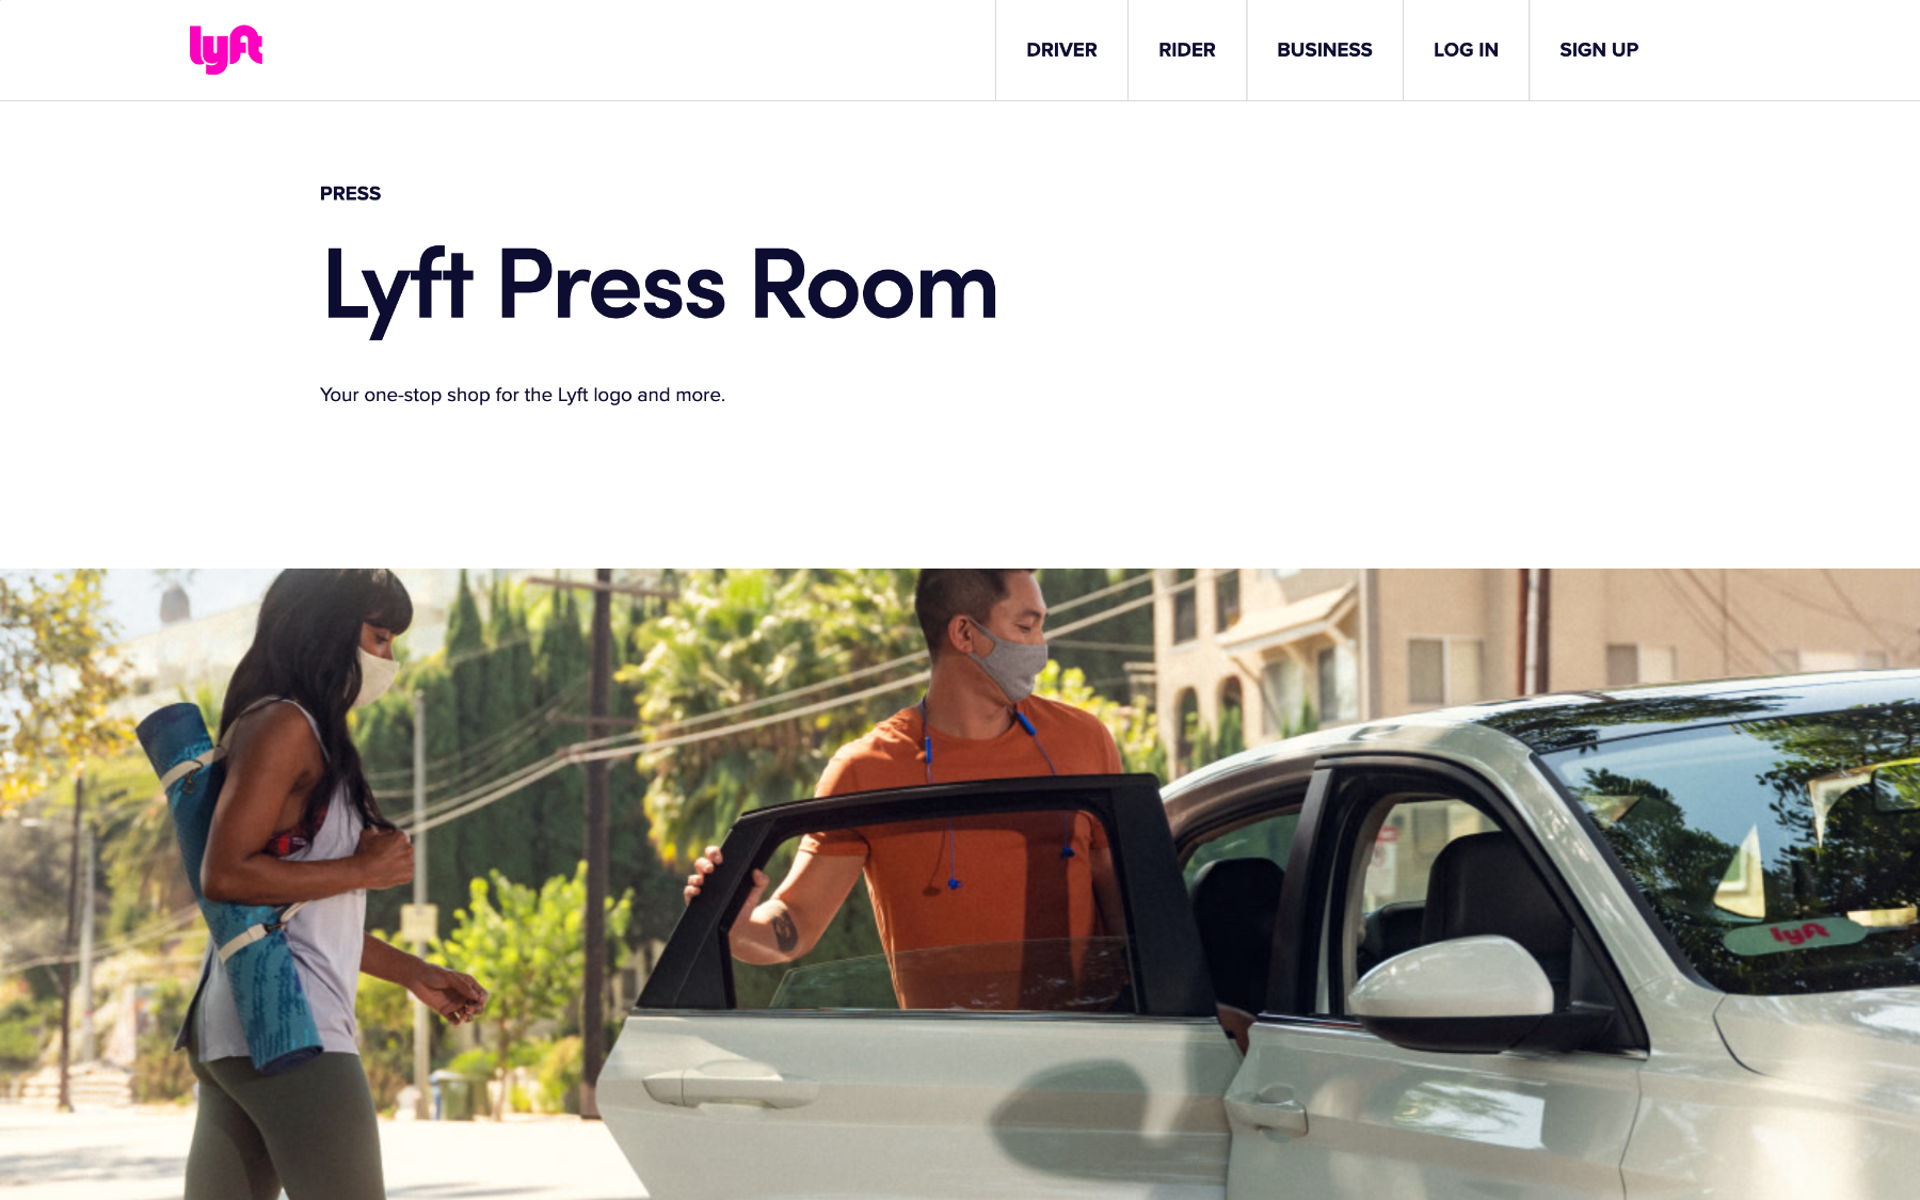 Lyft creates a sense of credibility by placing its top coverage up front